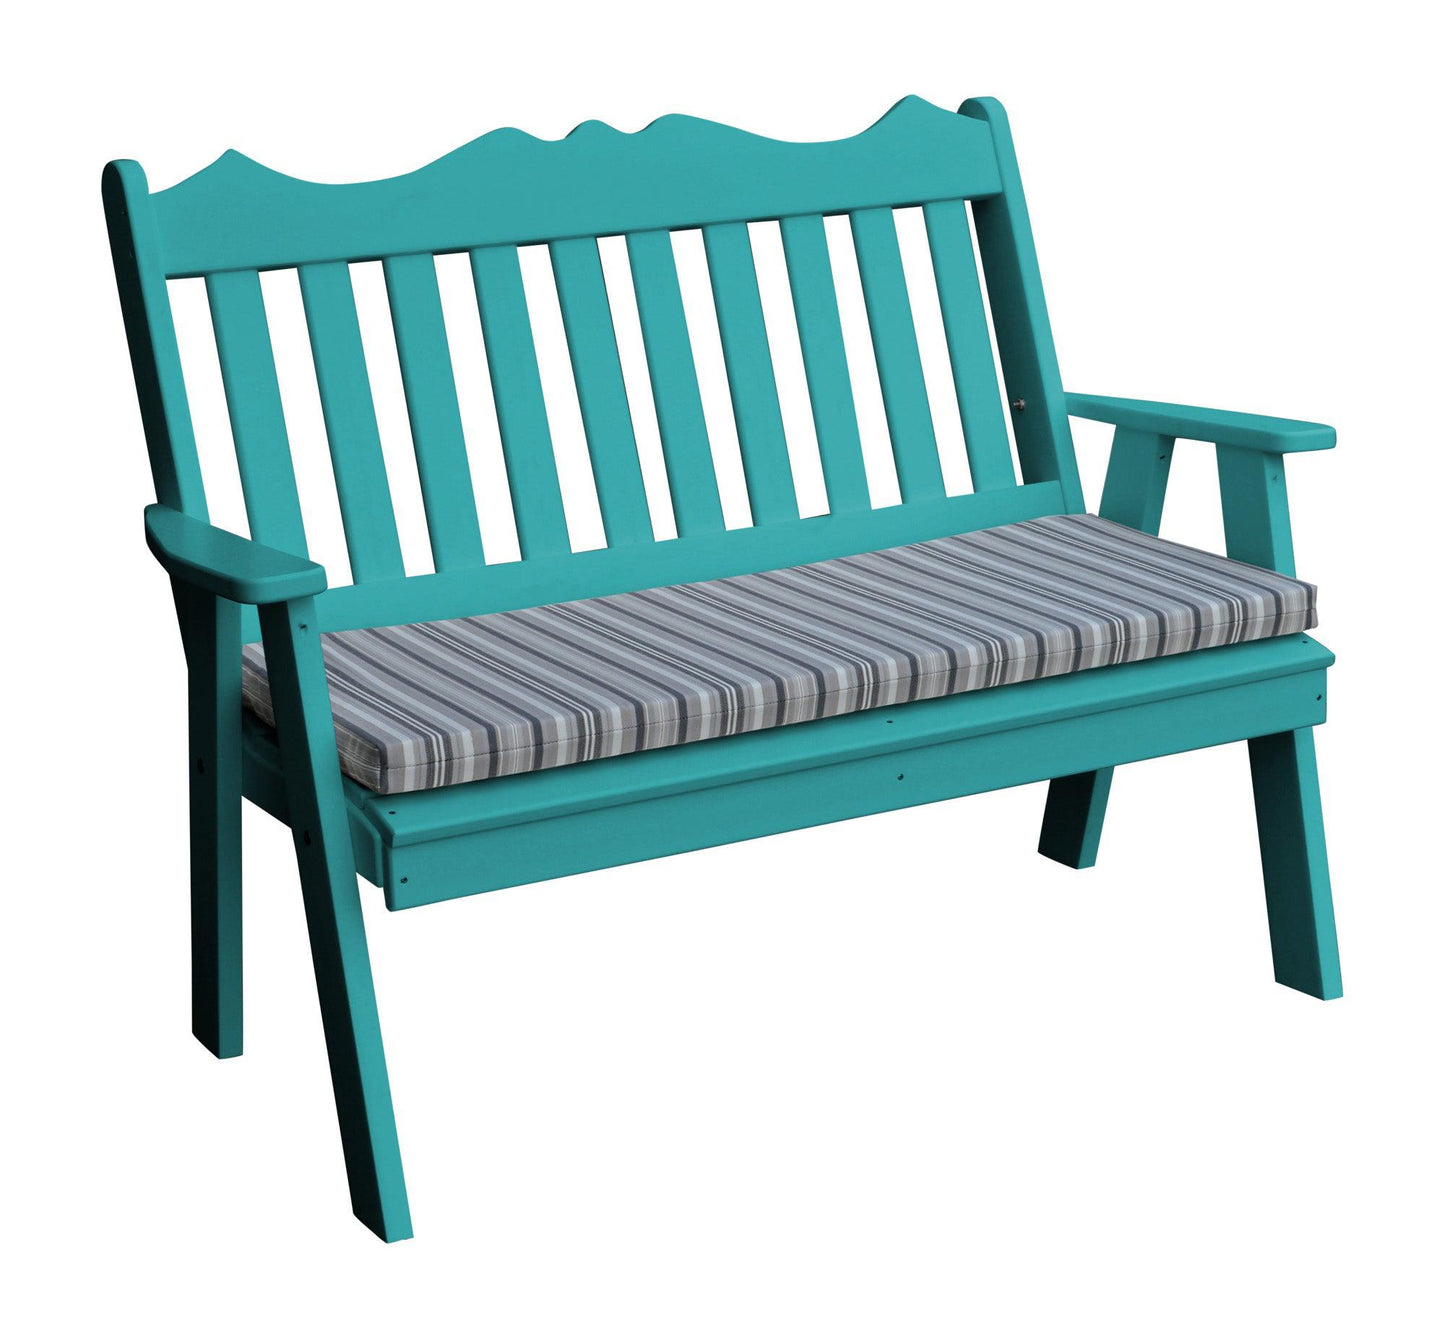 A&L Furniture Company Recycled Plastic 4' Royal English Garden Bench - LEAD TIME TO SHIP 10 BUSINESS DAYS